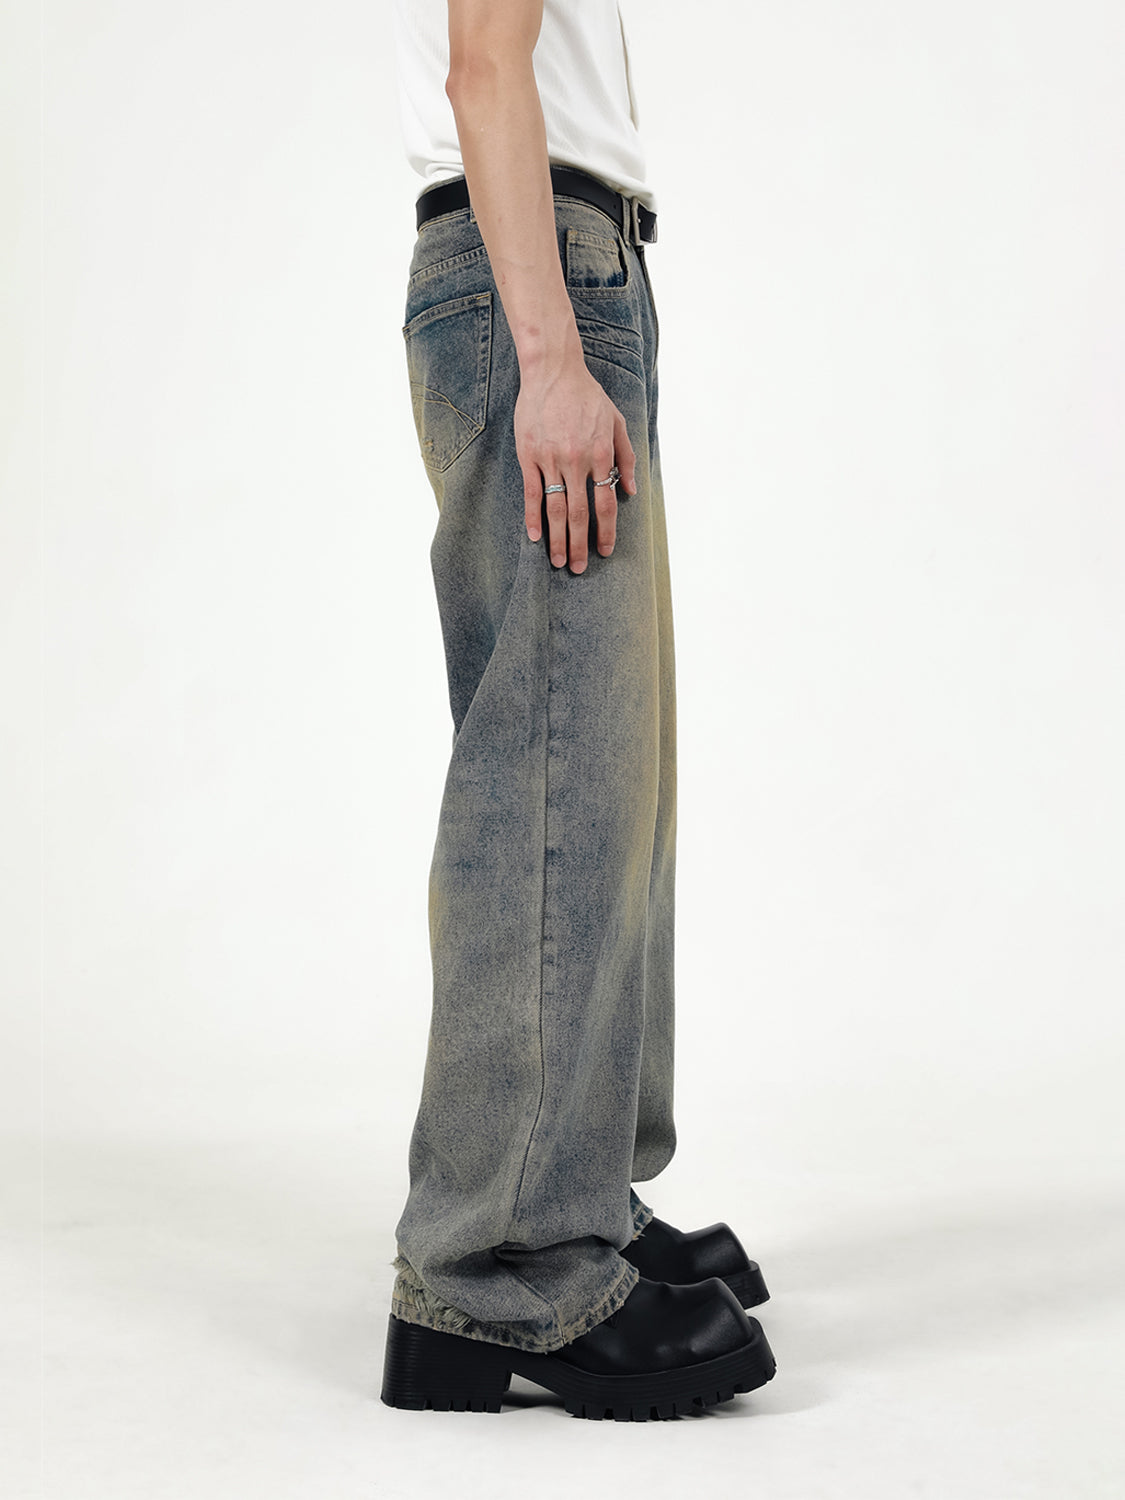 【23s July.】Vintage Straight Jeans